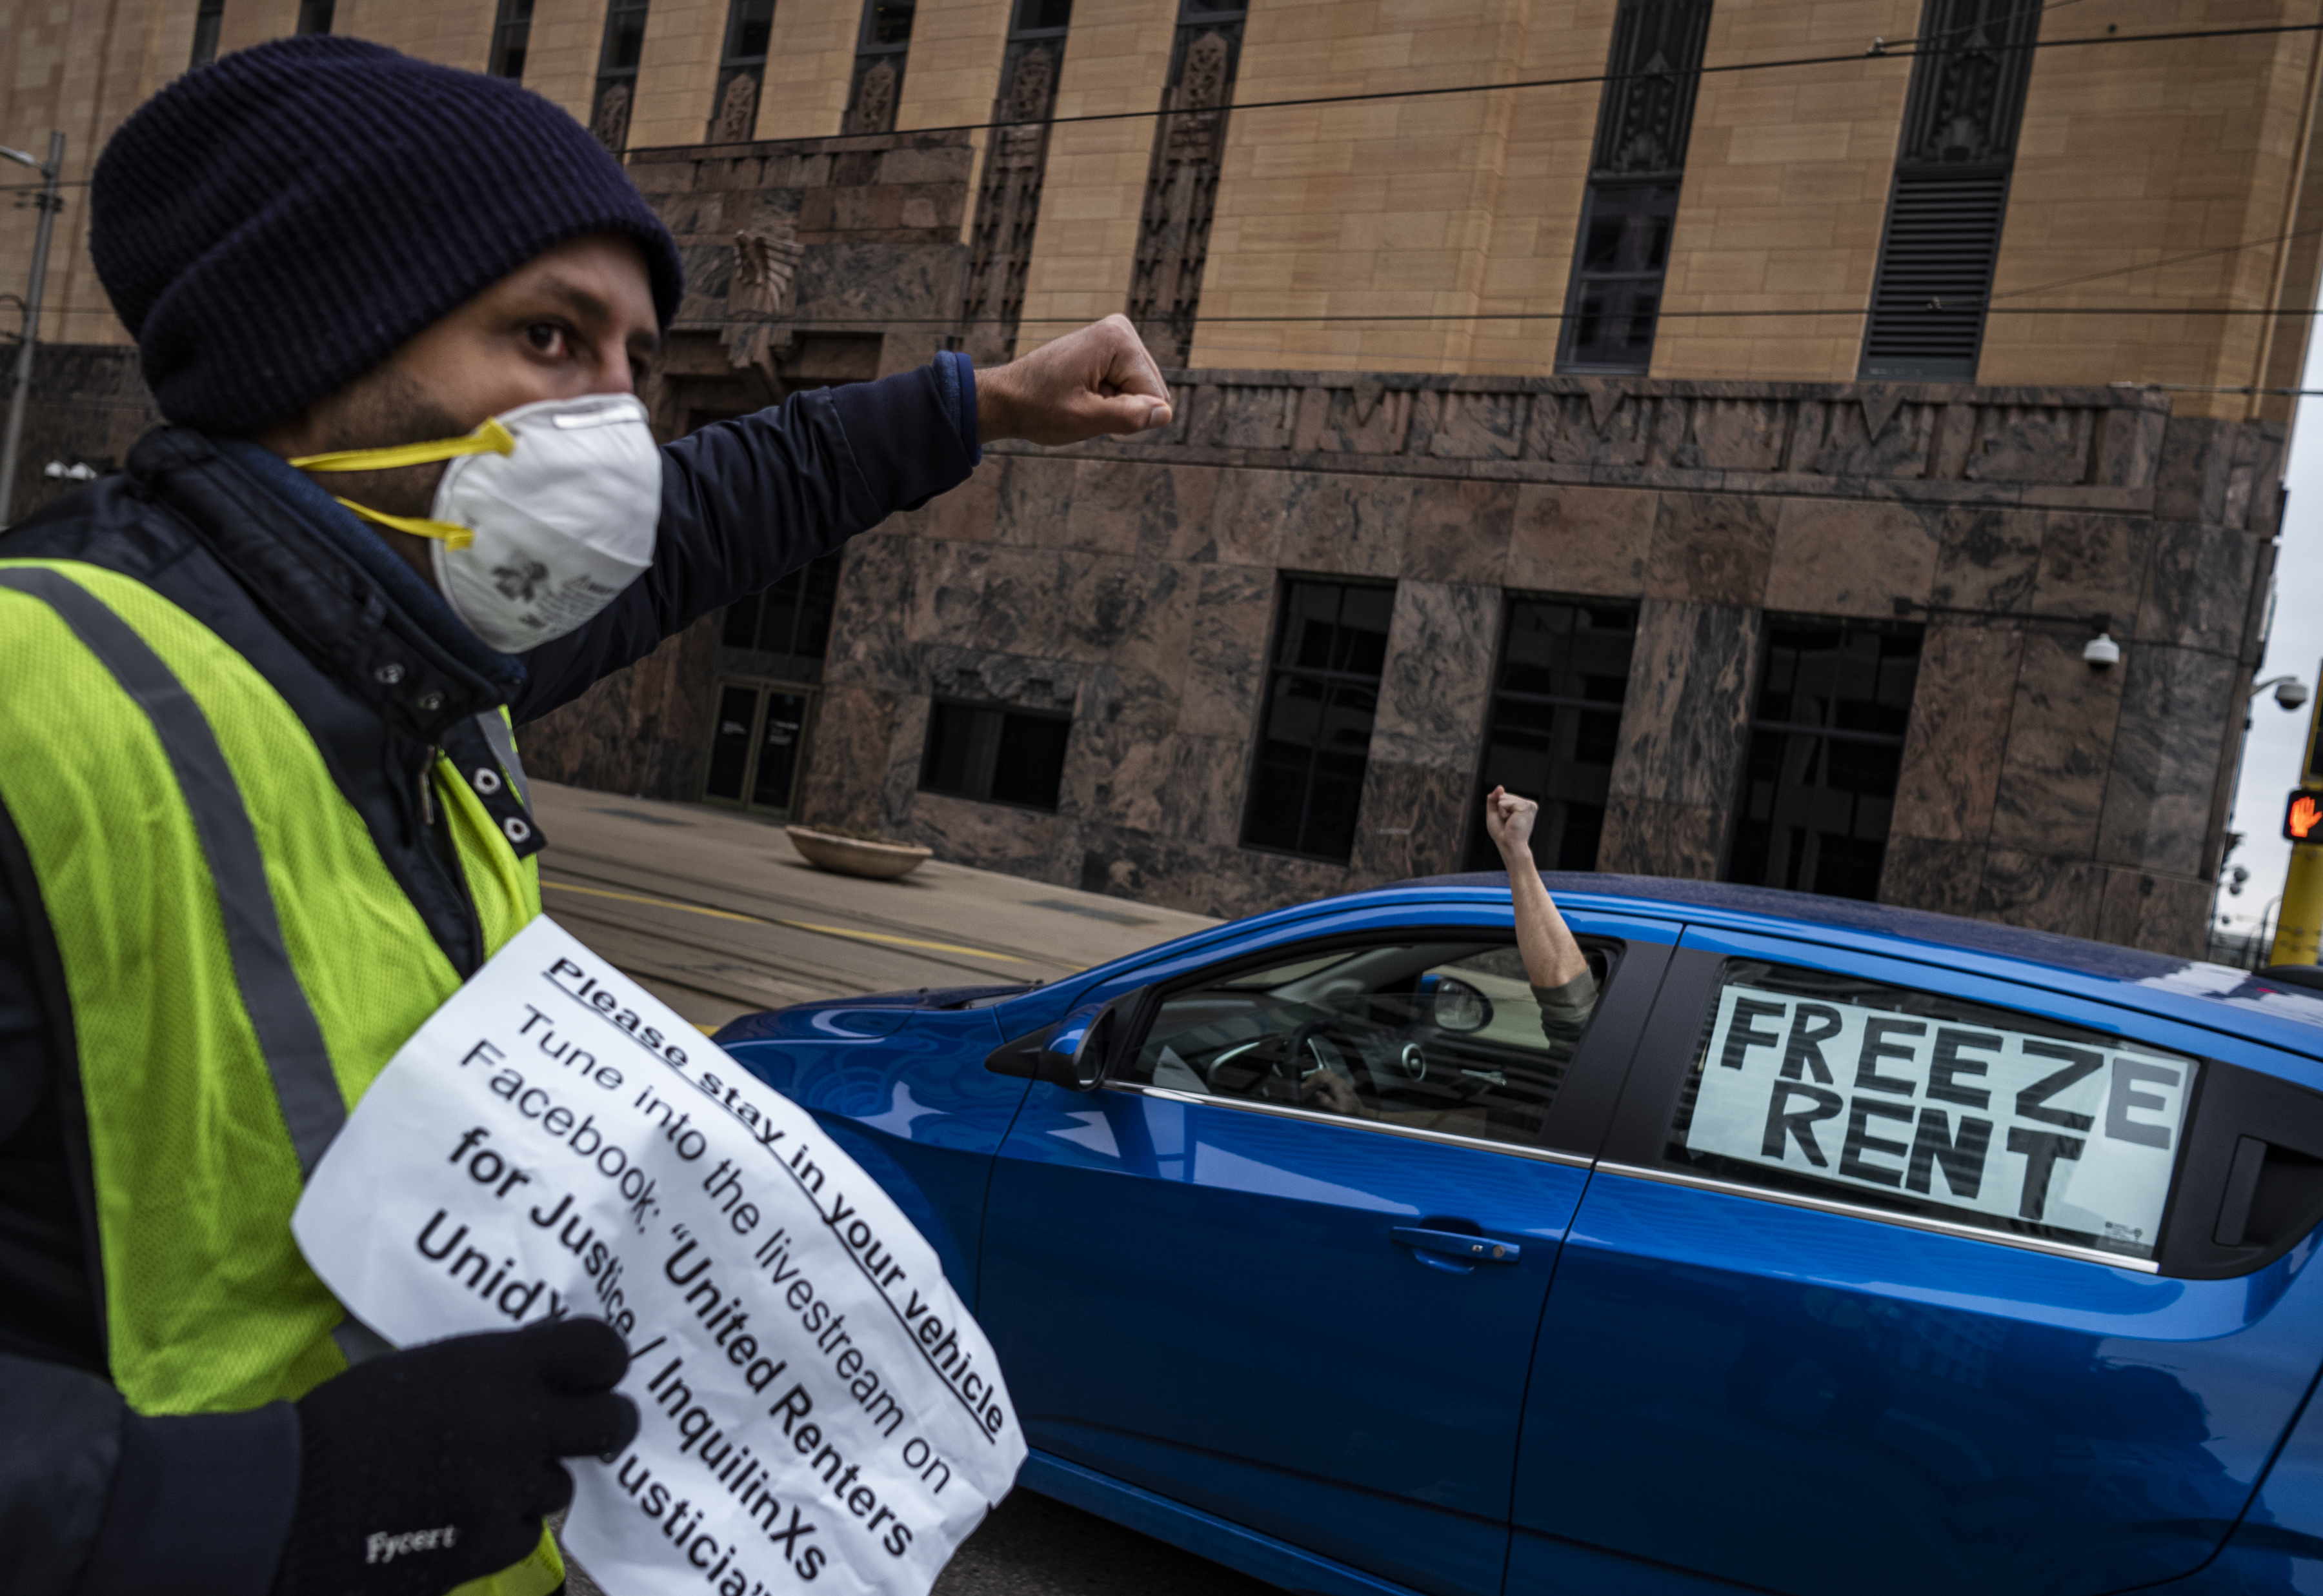 Tenant rights activist Nathan Sirdar helps lead a protest calling for relief for renters and homeowners during the coronavirus-related financial crisis, in Minneapolis, Minnesota on April 8, 2020. (Richard Tsong-Taatarii—Star Tribune/Getty Images)